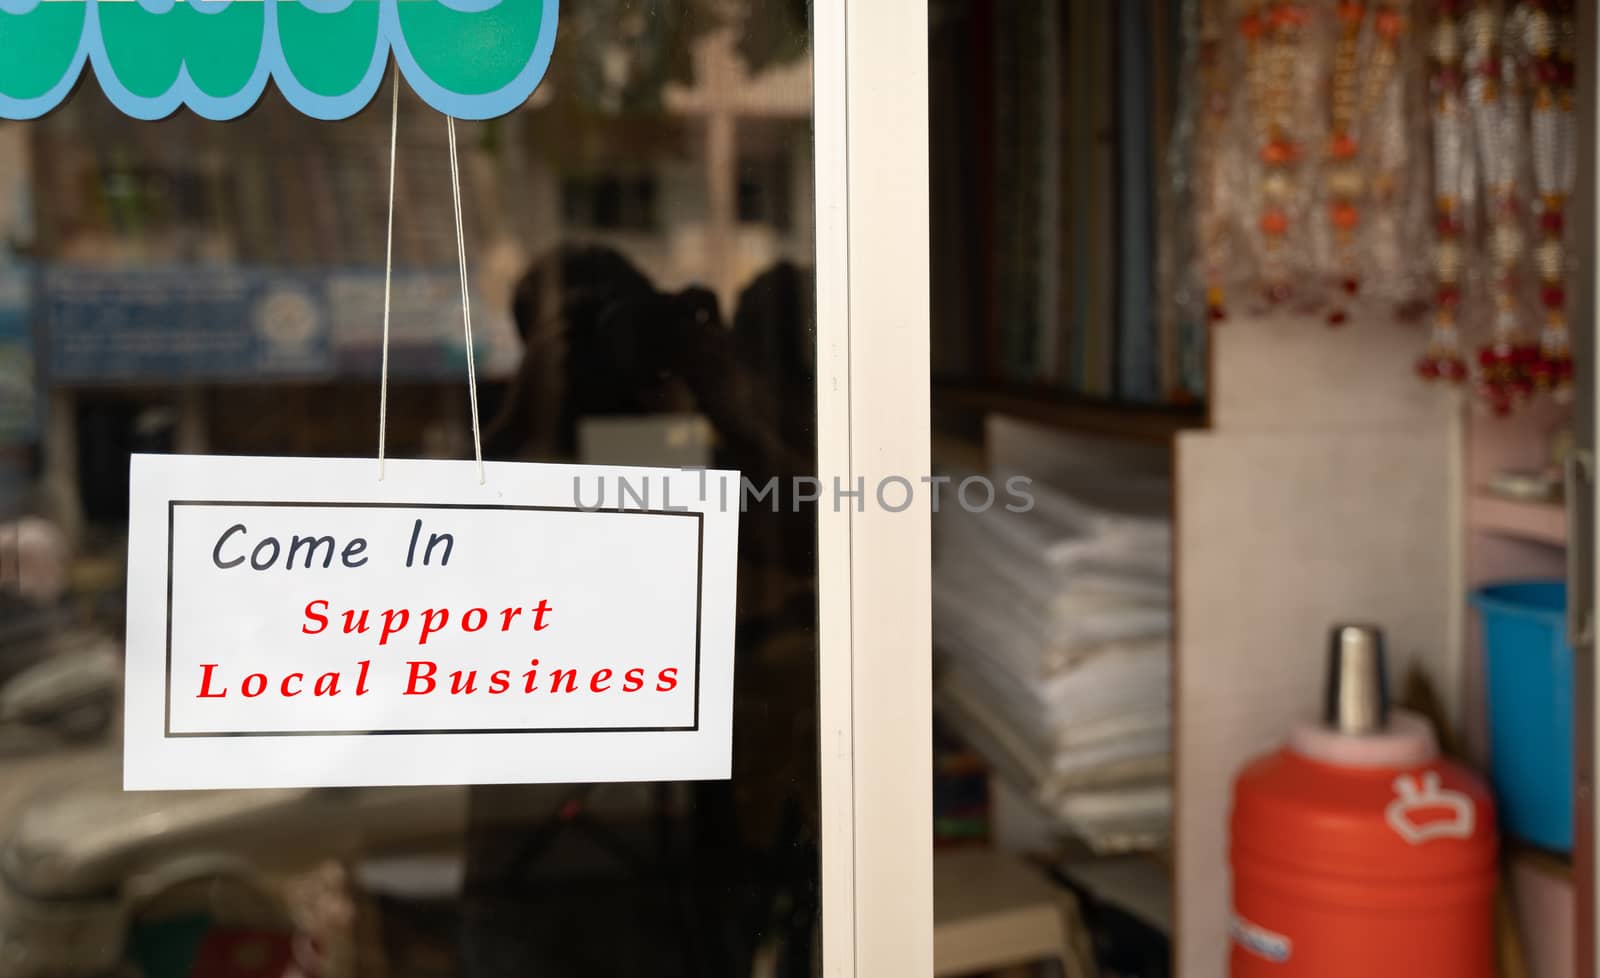 Come in support local business signage attached infront of door during coronavirus or covid-19 pandemic to support local community. by lakshmiprasad.maski@gmai.com